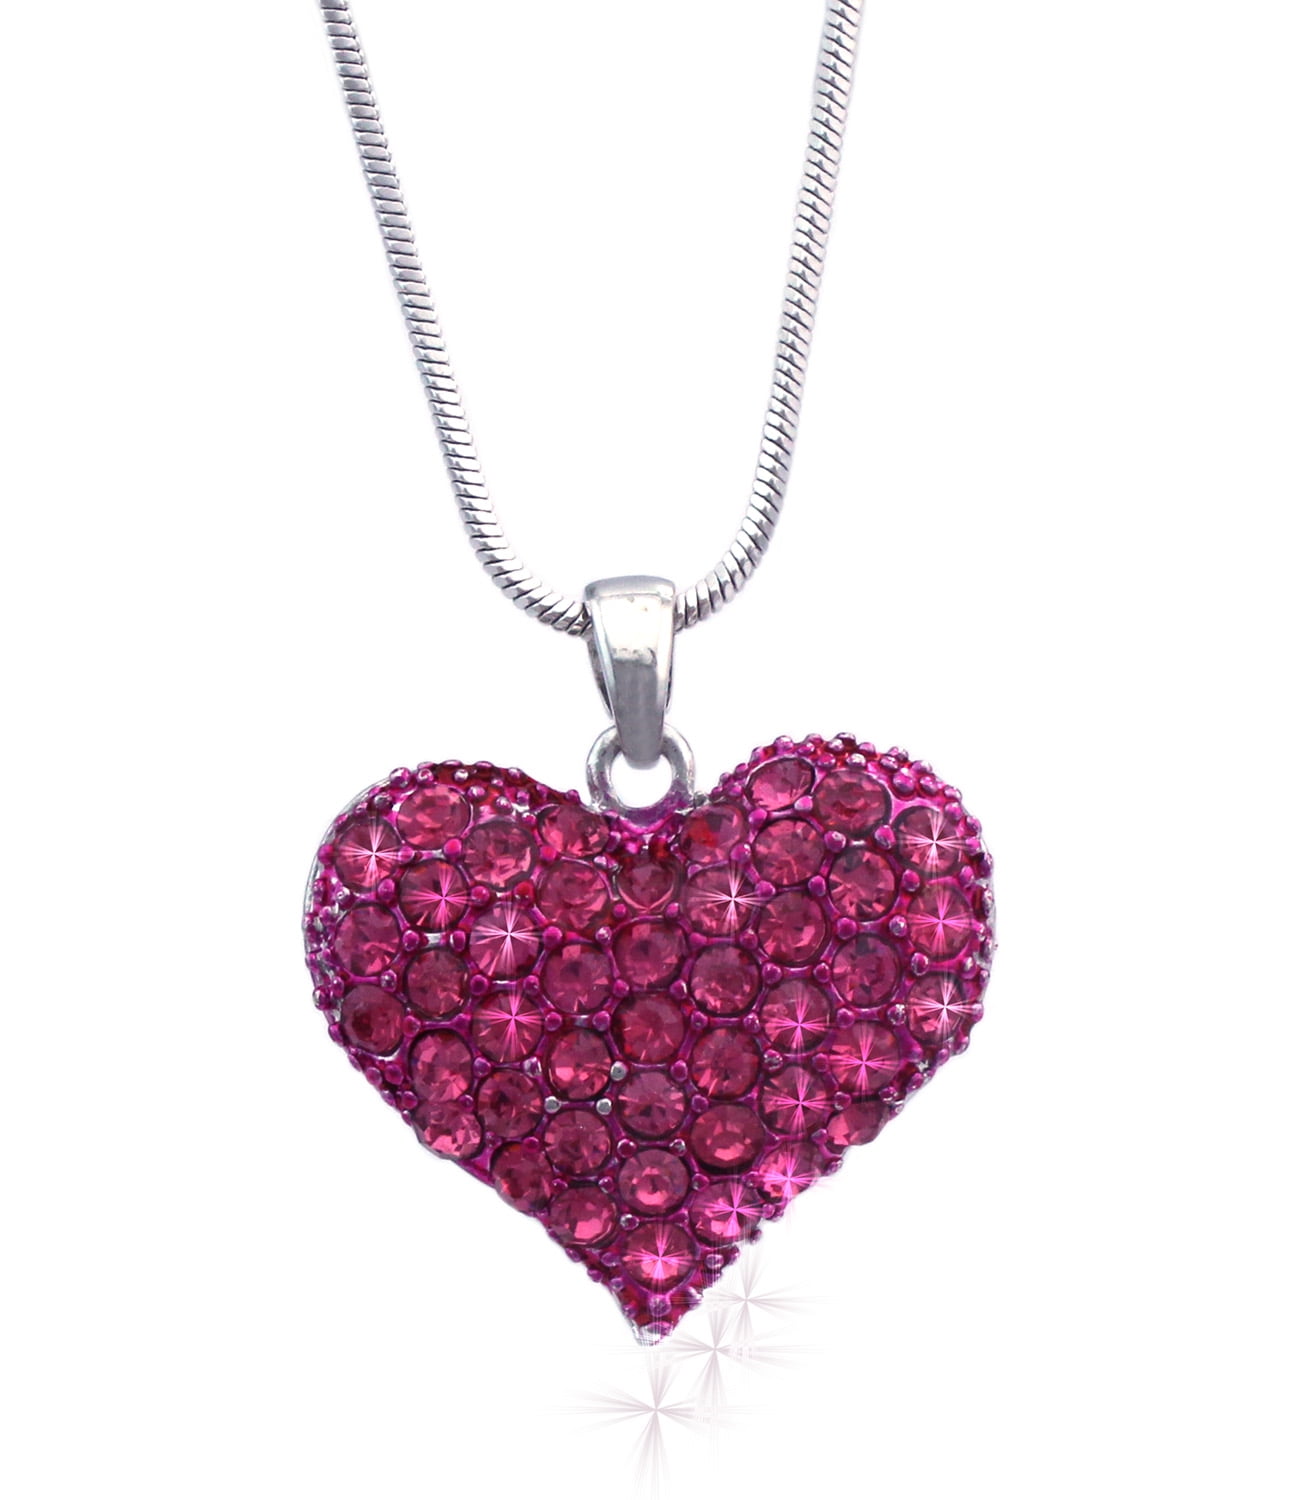 cocojewelry Small Heart Crystal Pave Pendant Necklace Valentine's Day